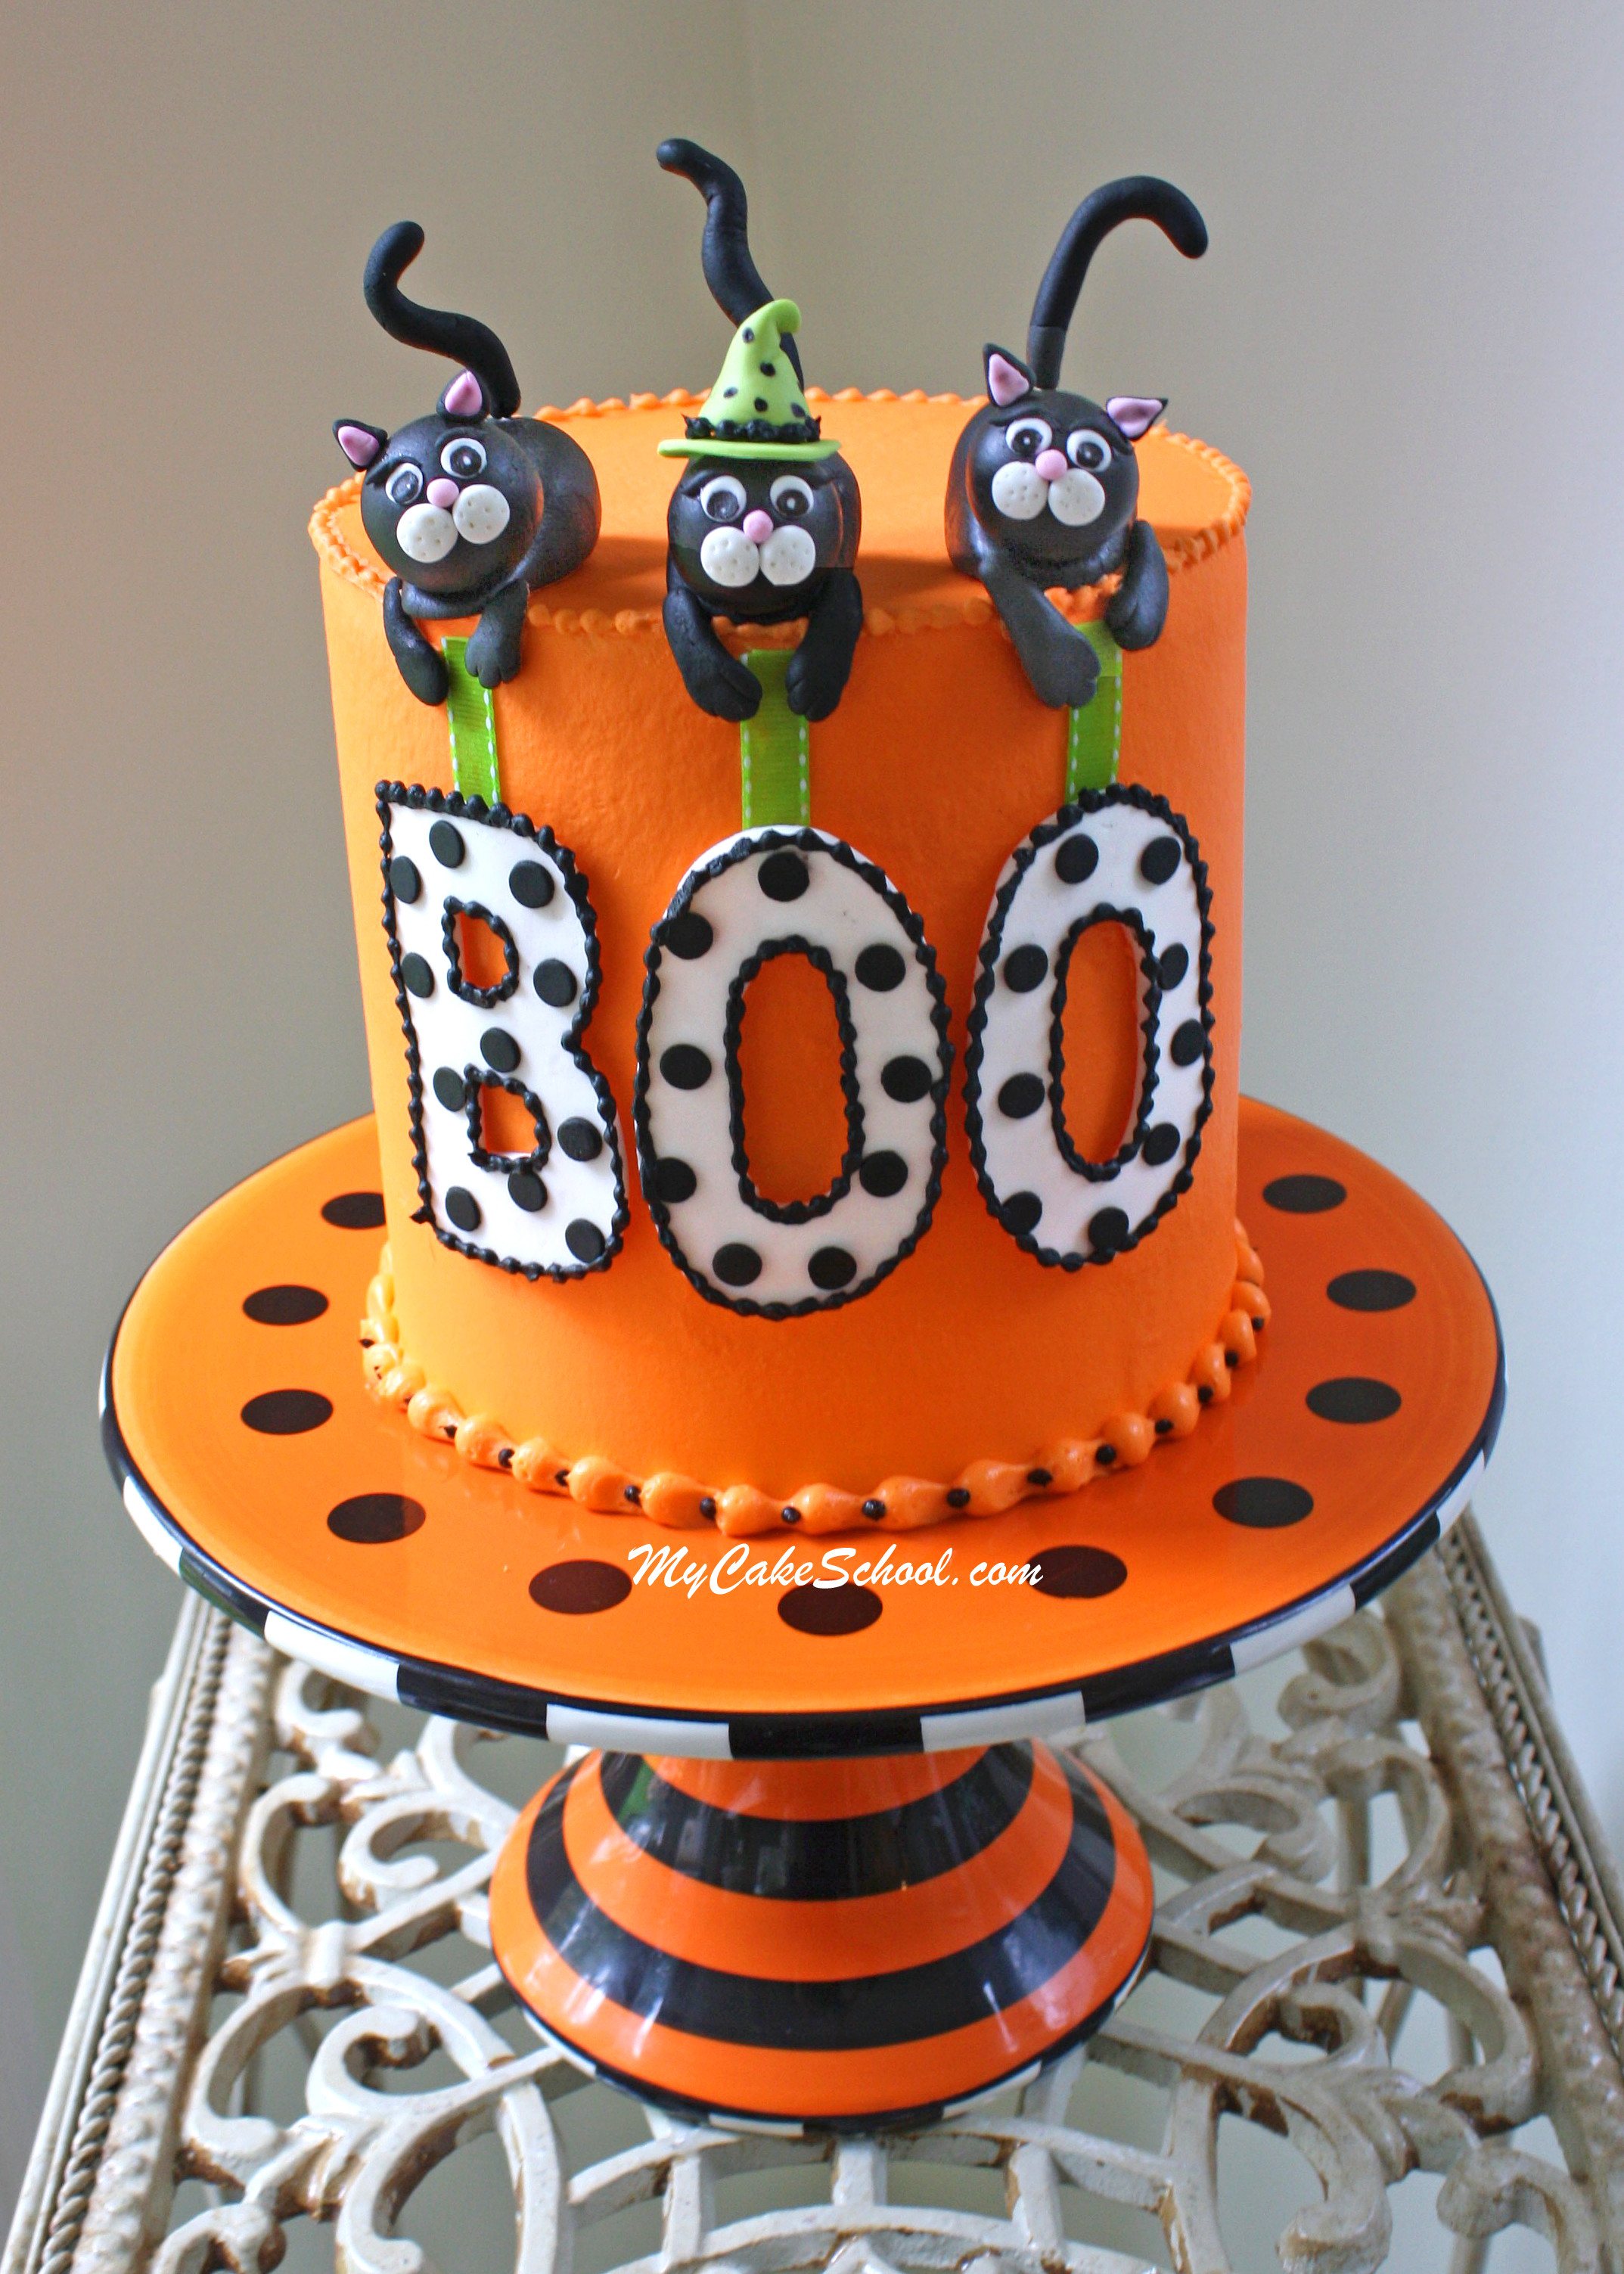 Images Of Halloween Cakes
 Roundup of the BEST Halloween Cakes Tutorials and Ideas